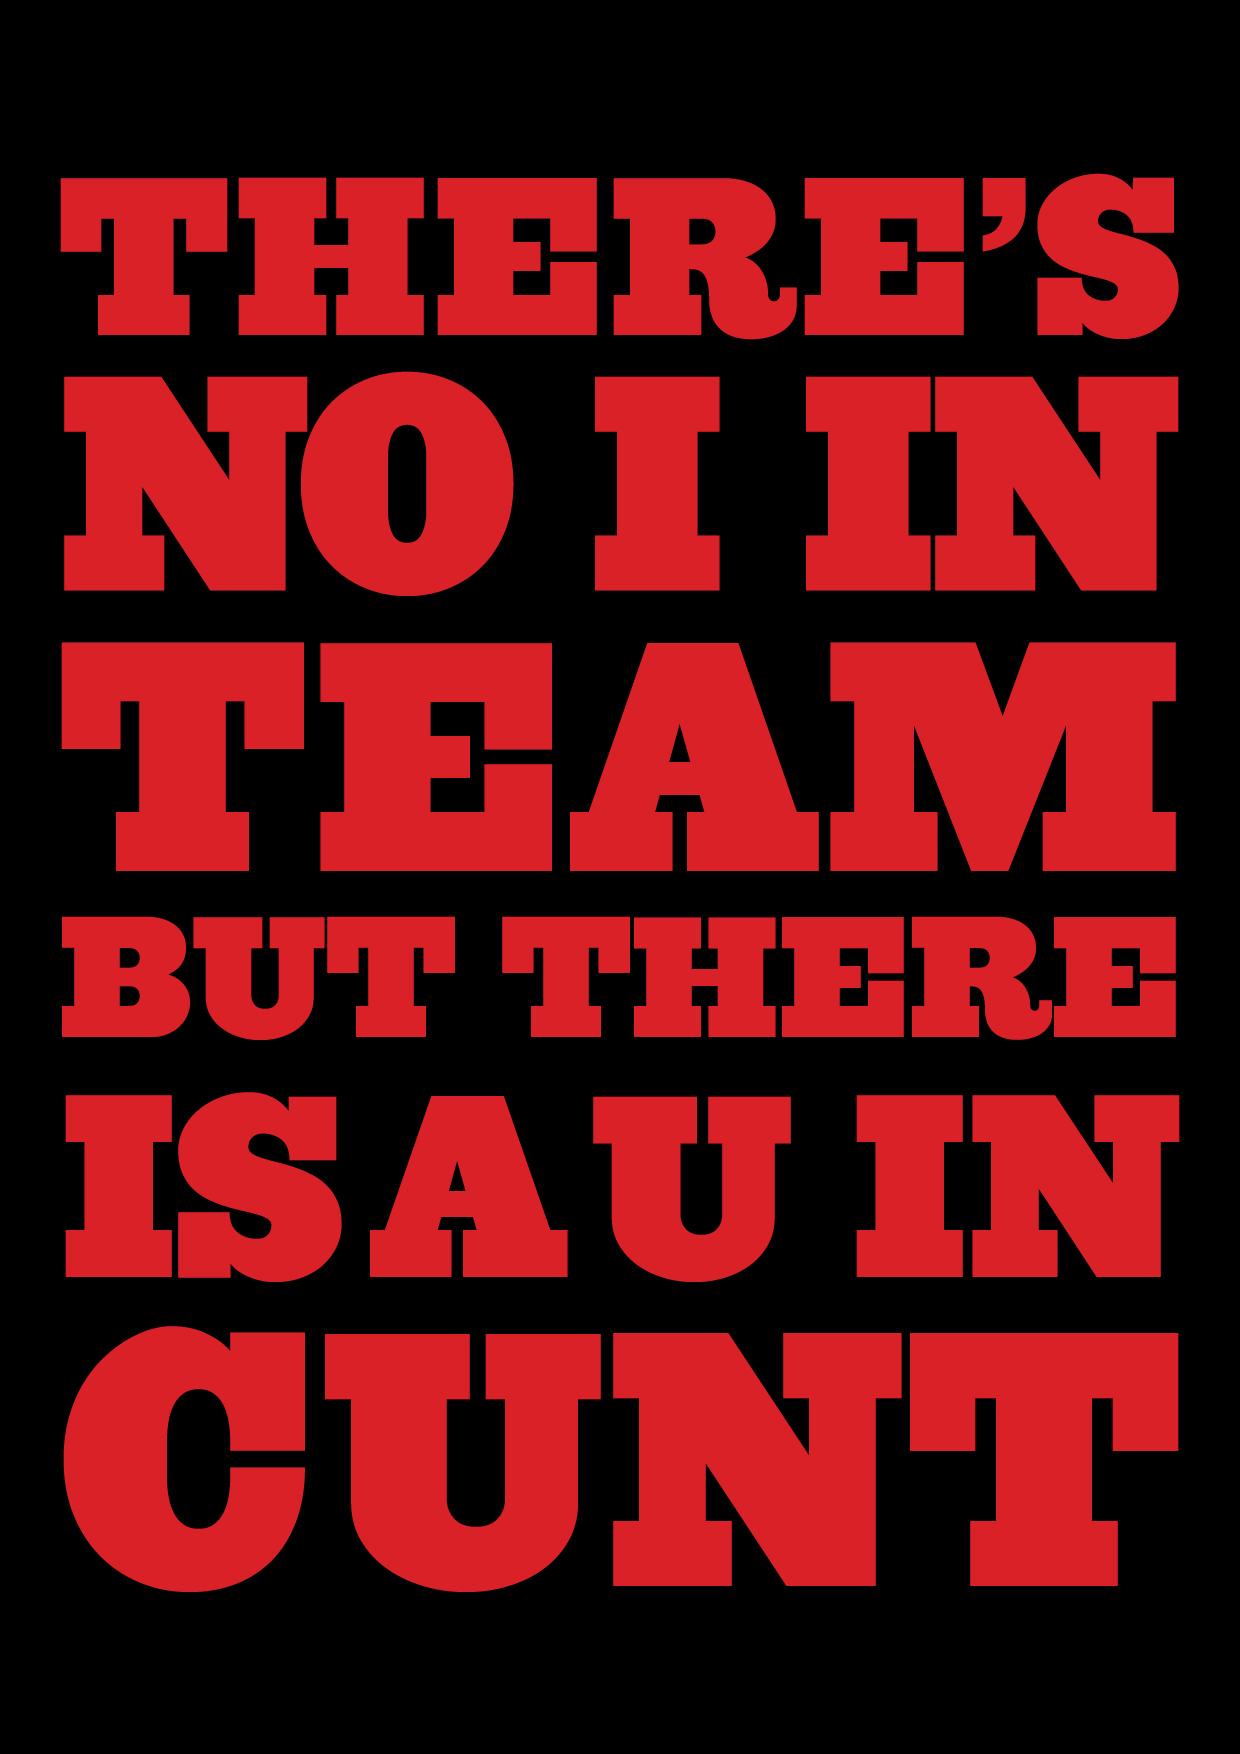 There's No I in Team, but there is a U in Cunt